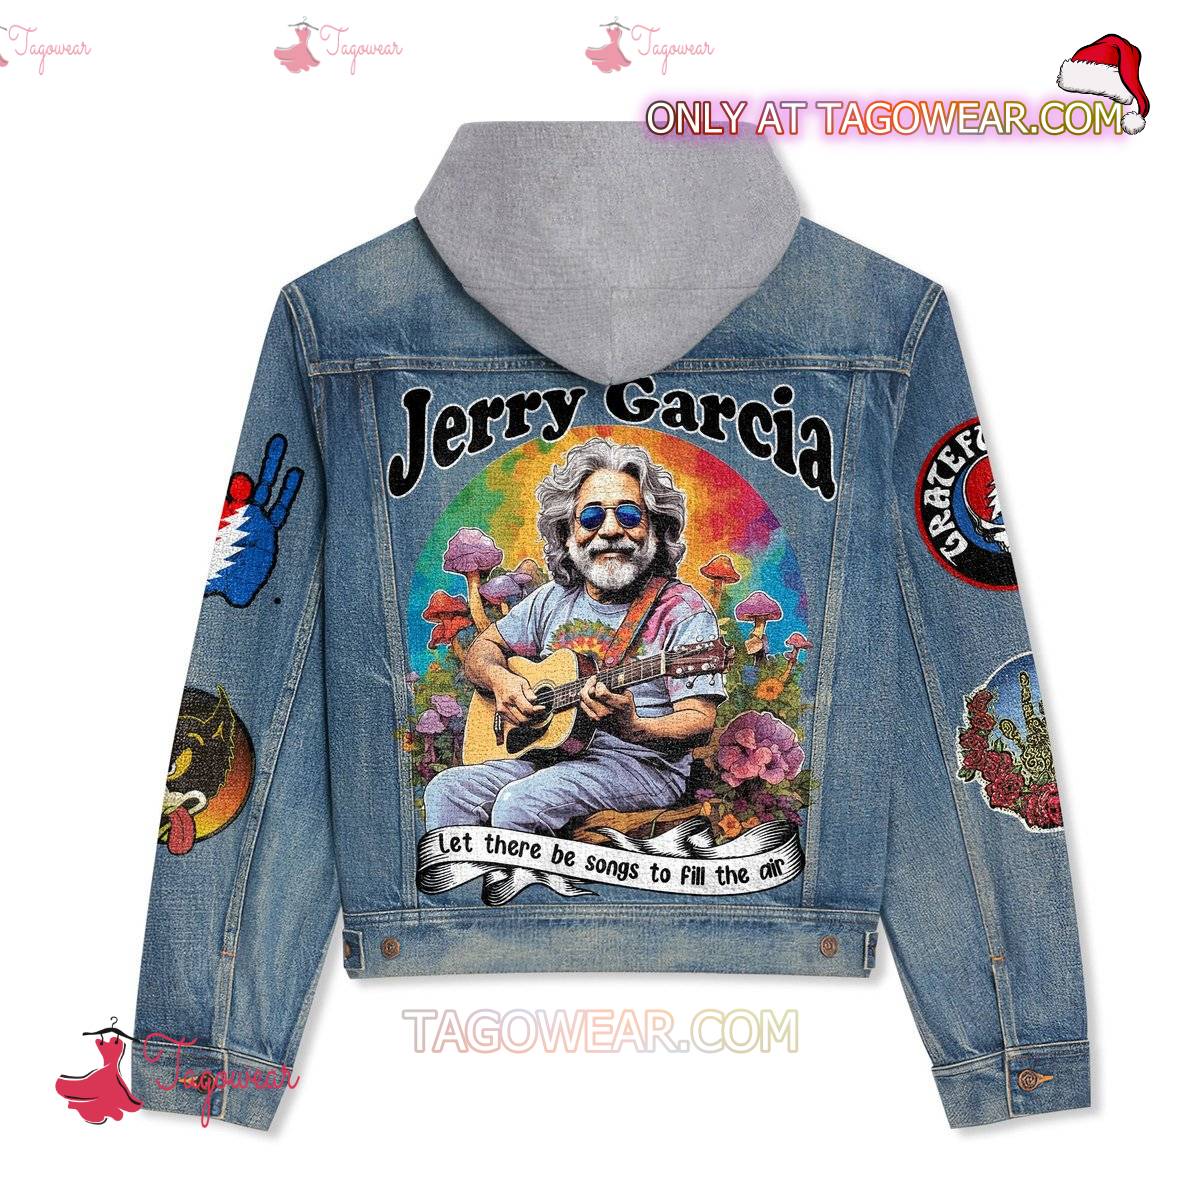 Jerry Garcia Let There Be Songs To Fill The Air Jean Hoodie Jacket a